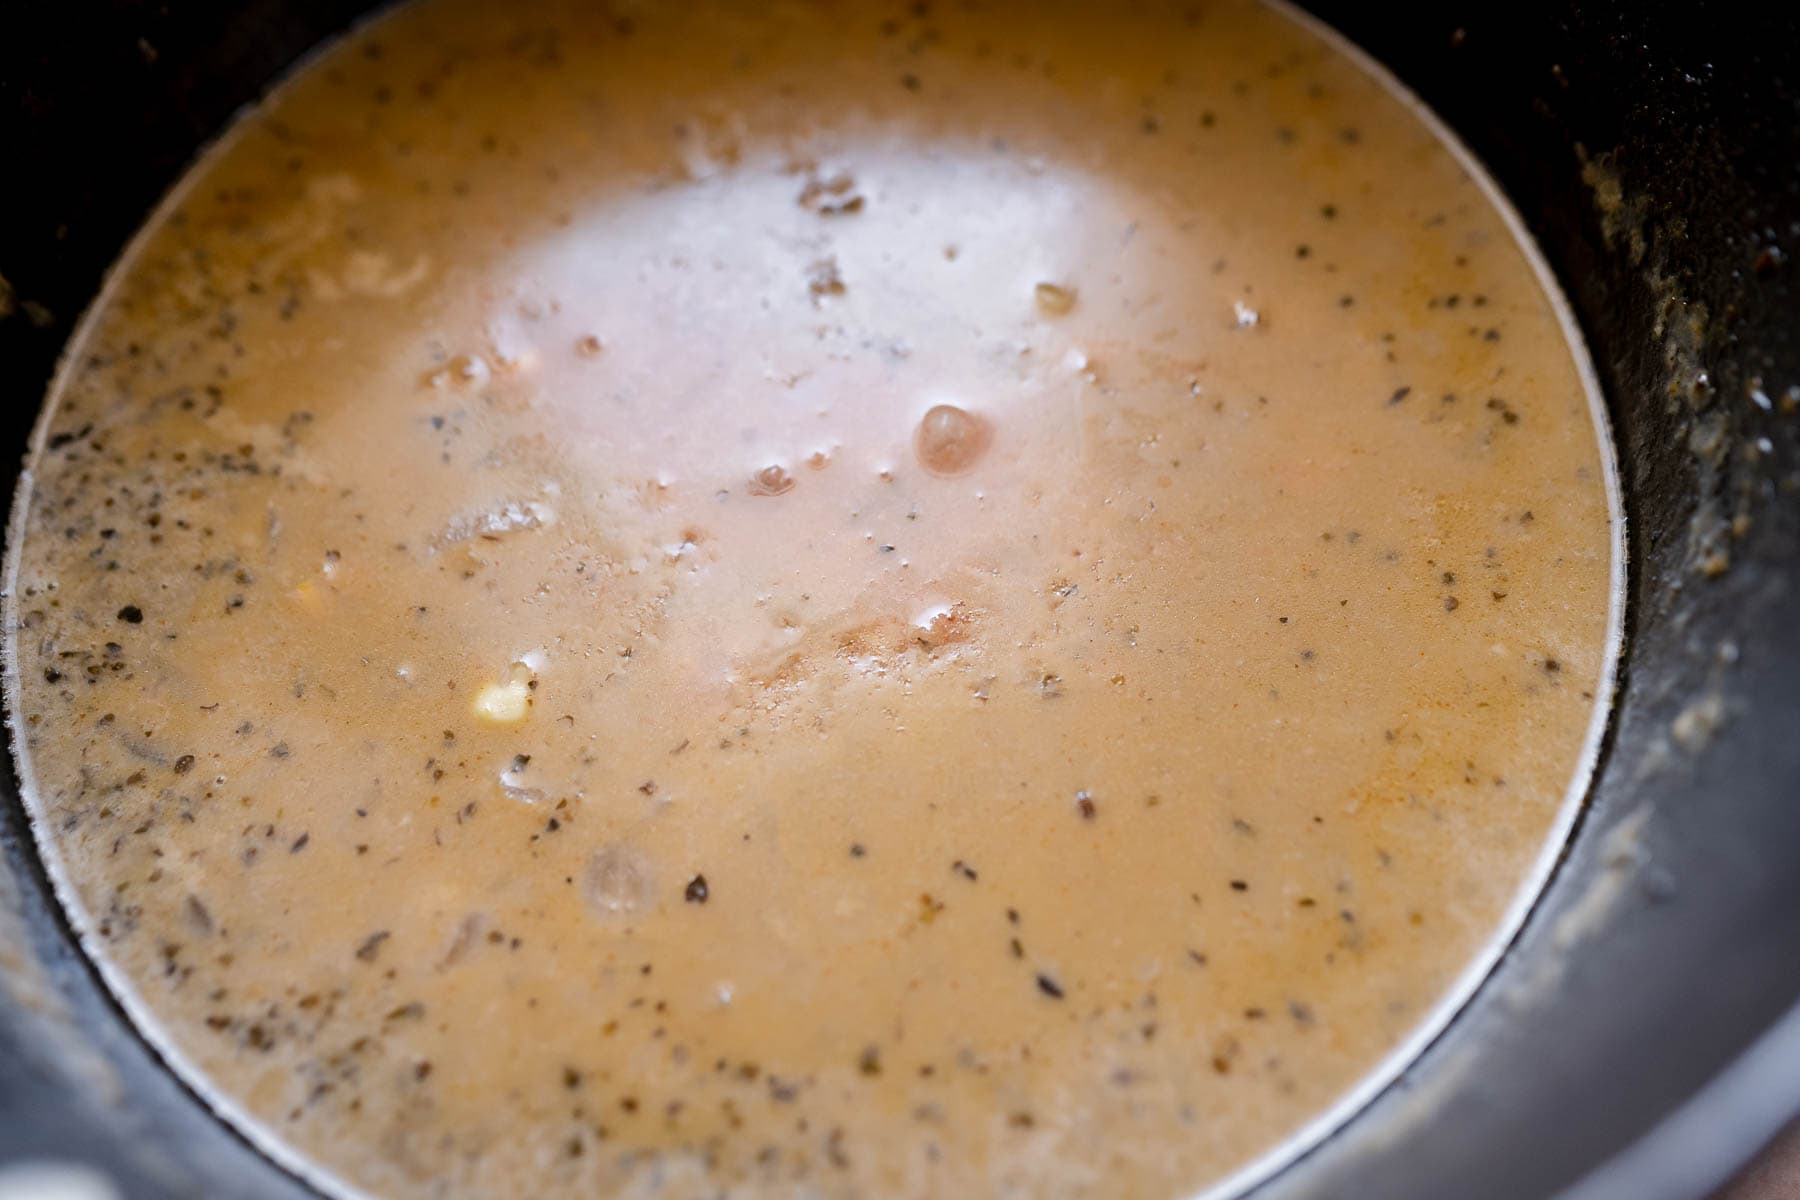 A light brown liquid resting in a large black pot.